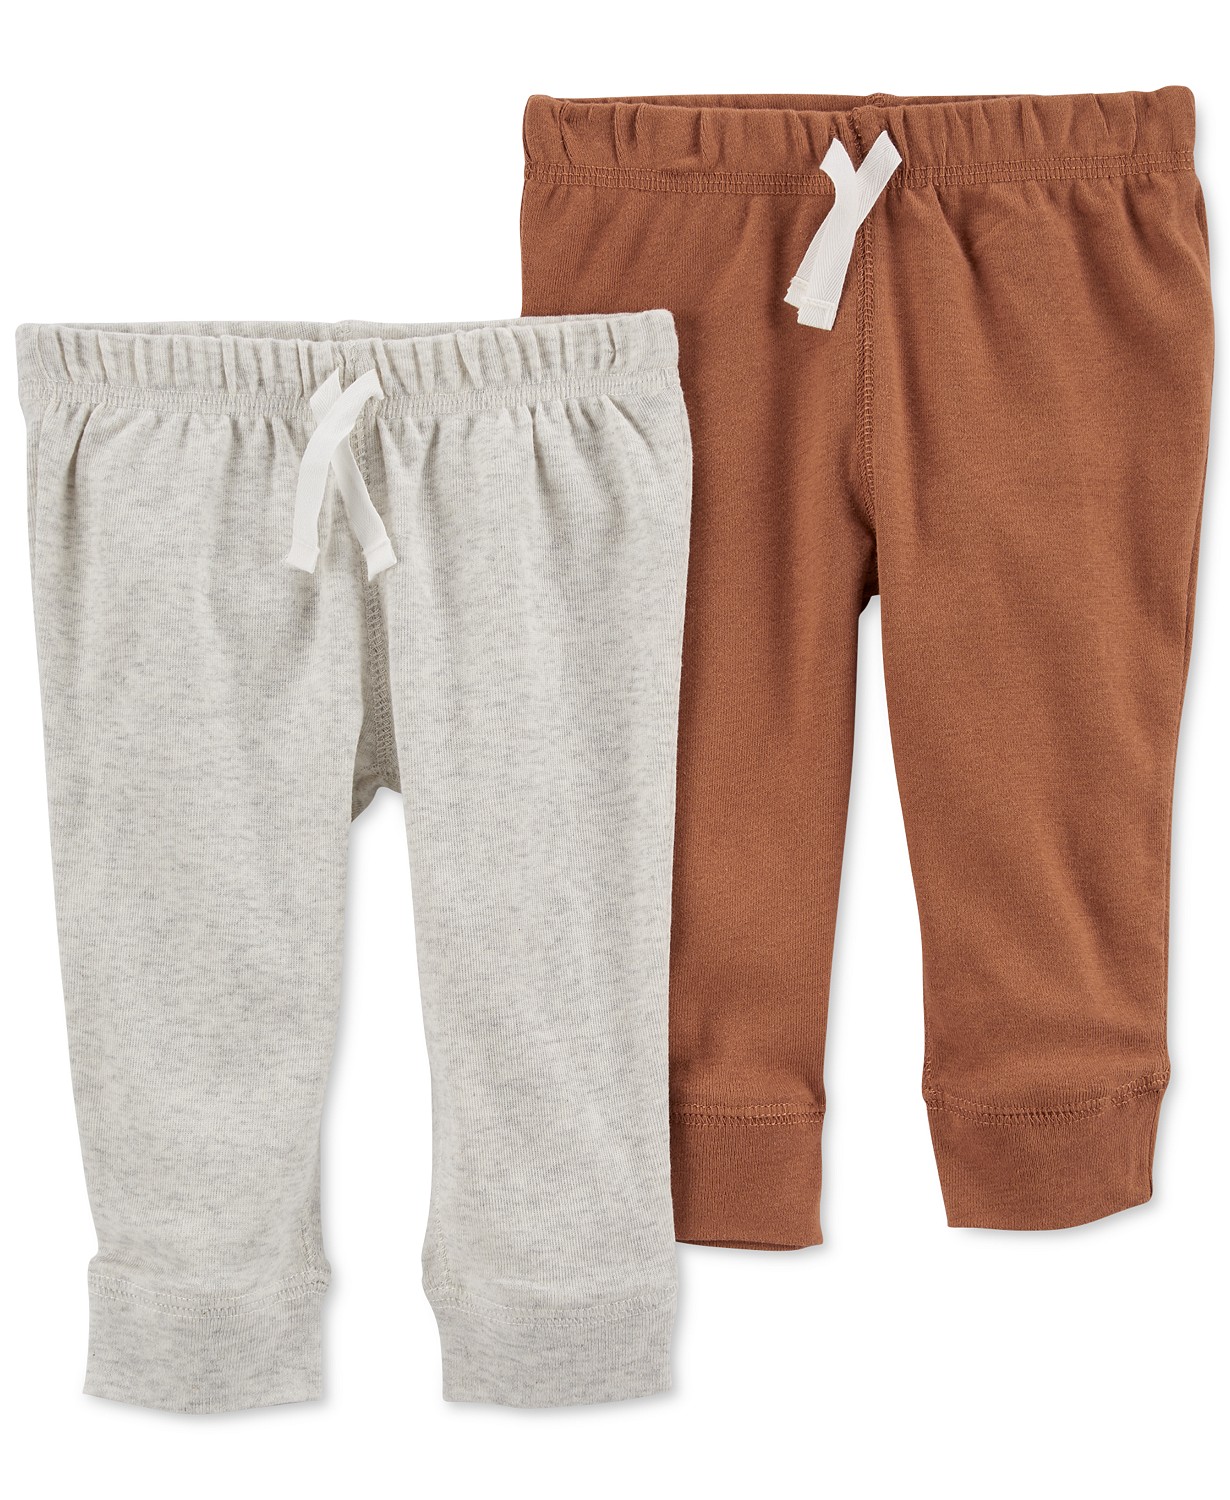 Baby Boys or Girls 2-Pack Pull-On Cotton Pants